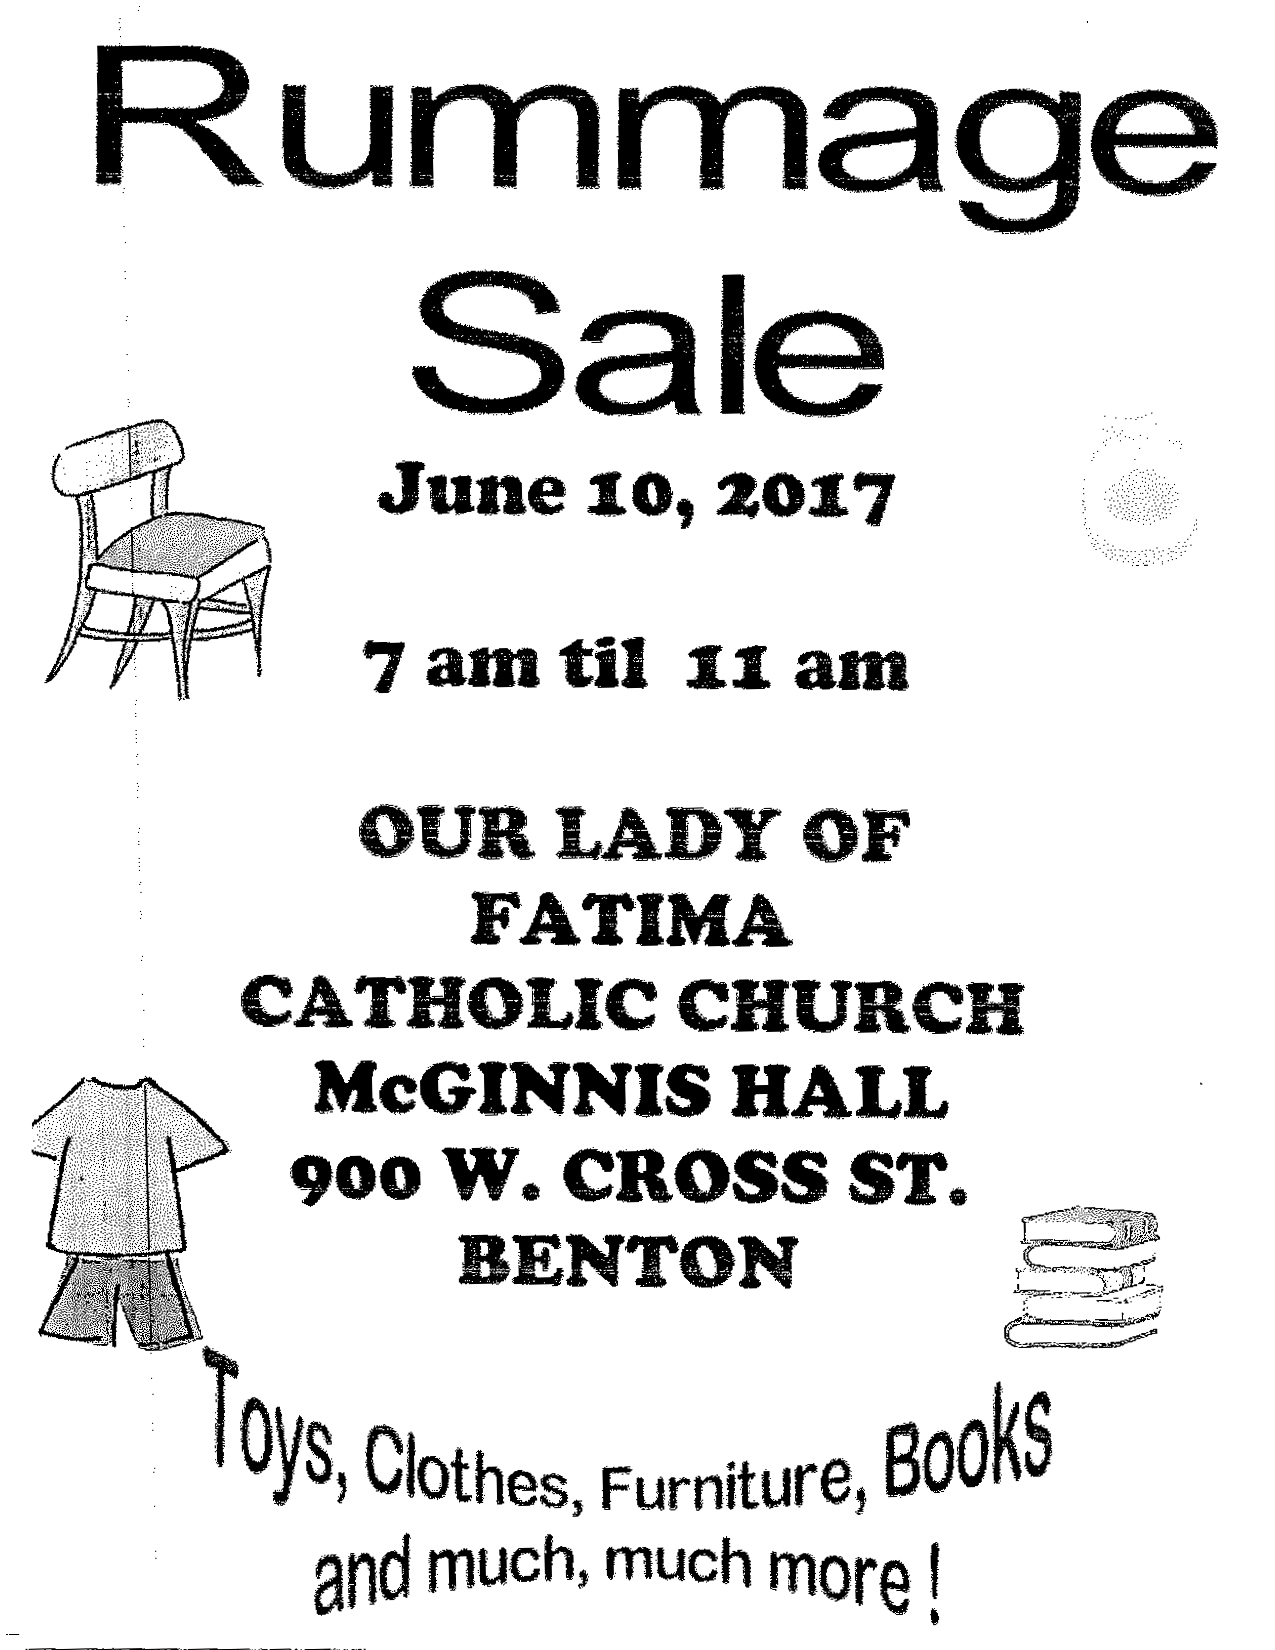 Our Lady of Fatima to Host Rummage Sale June 10th